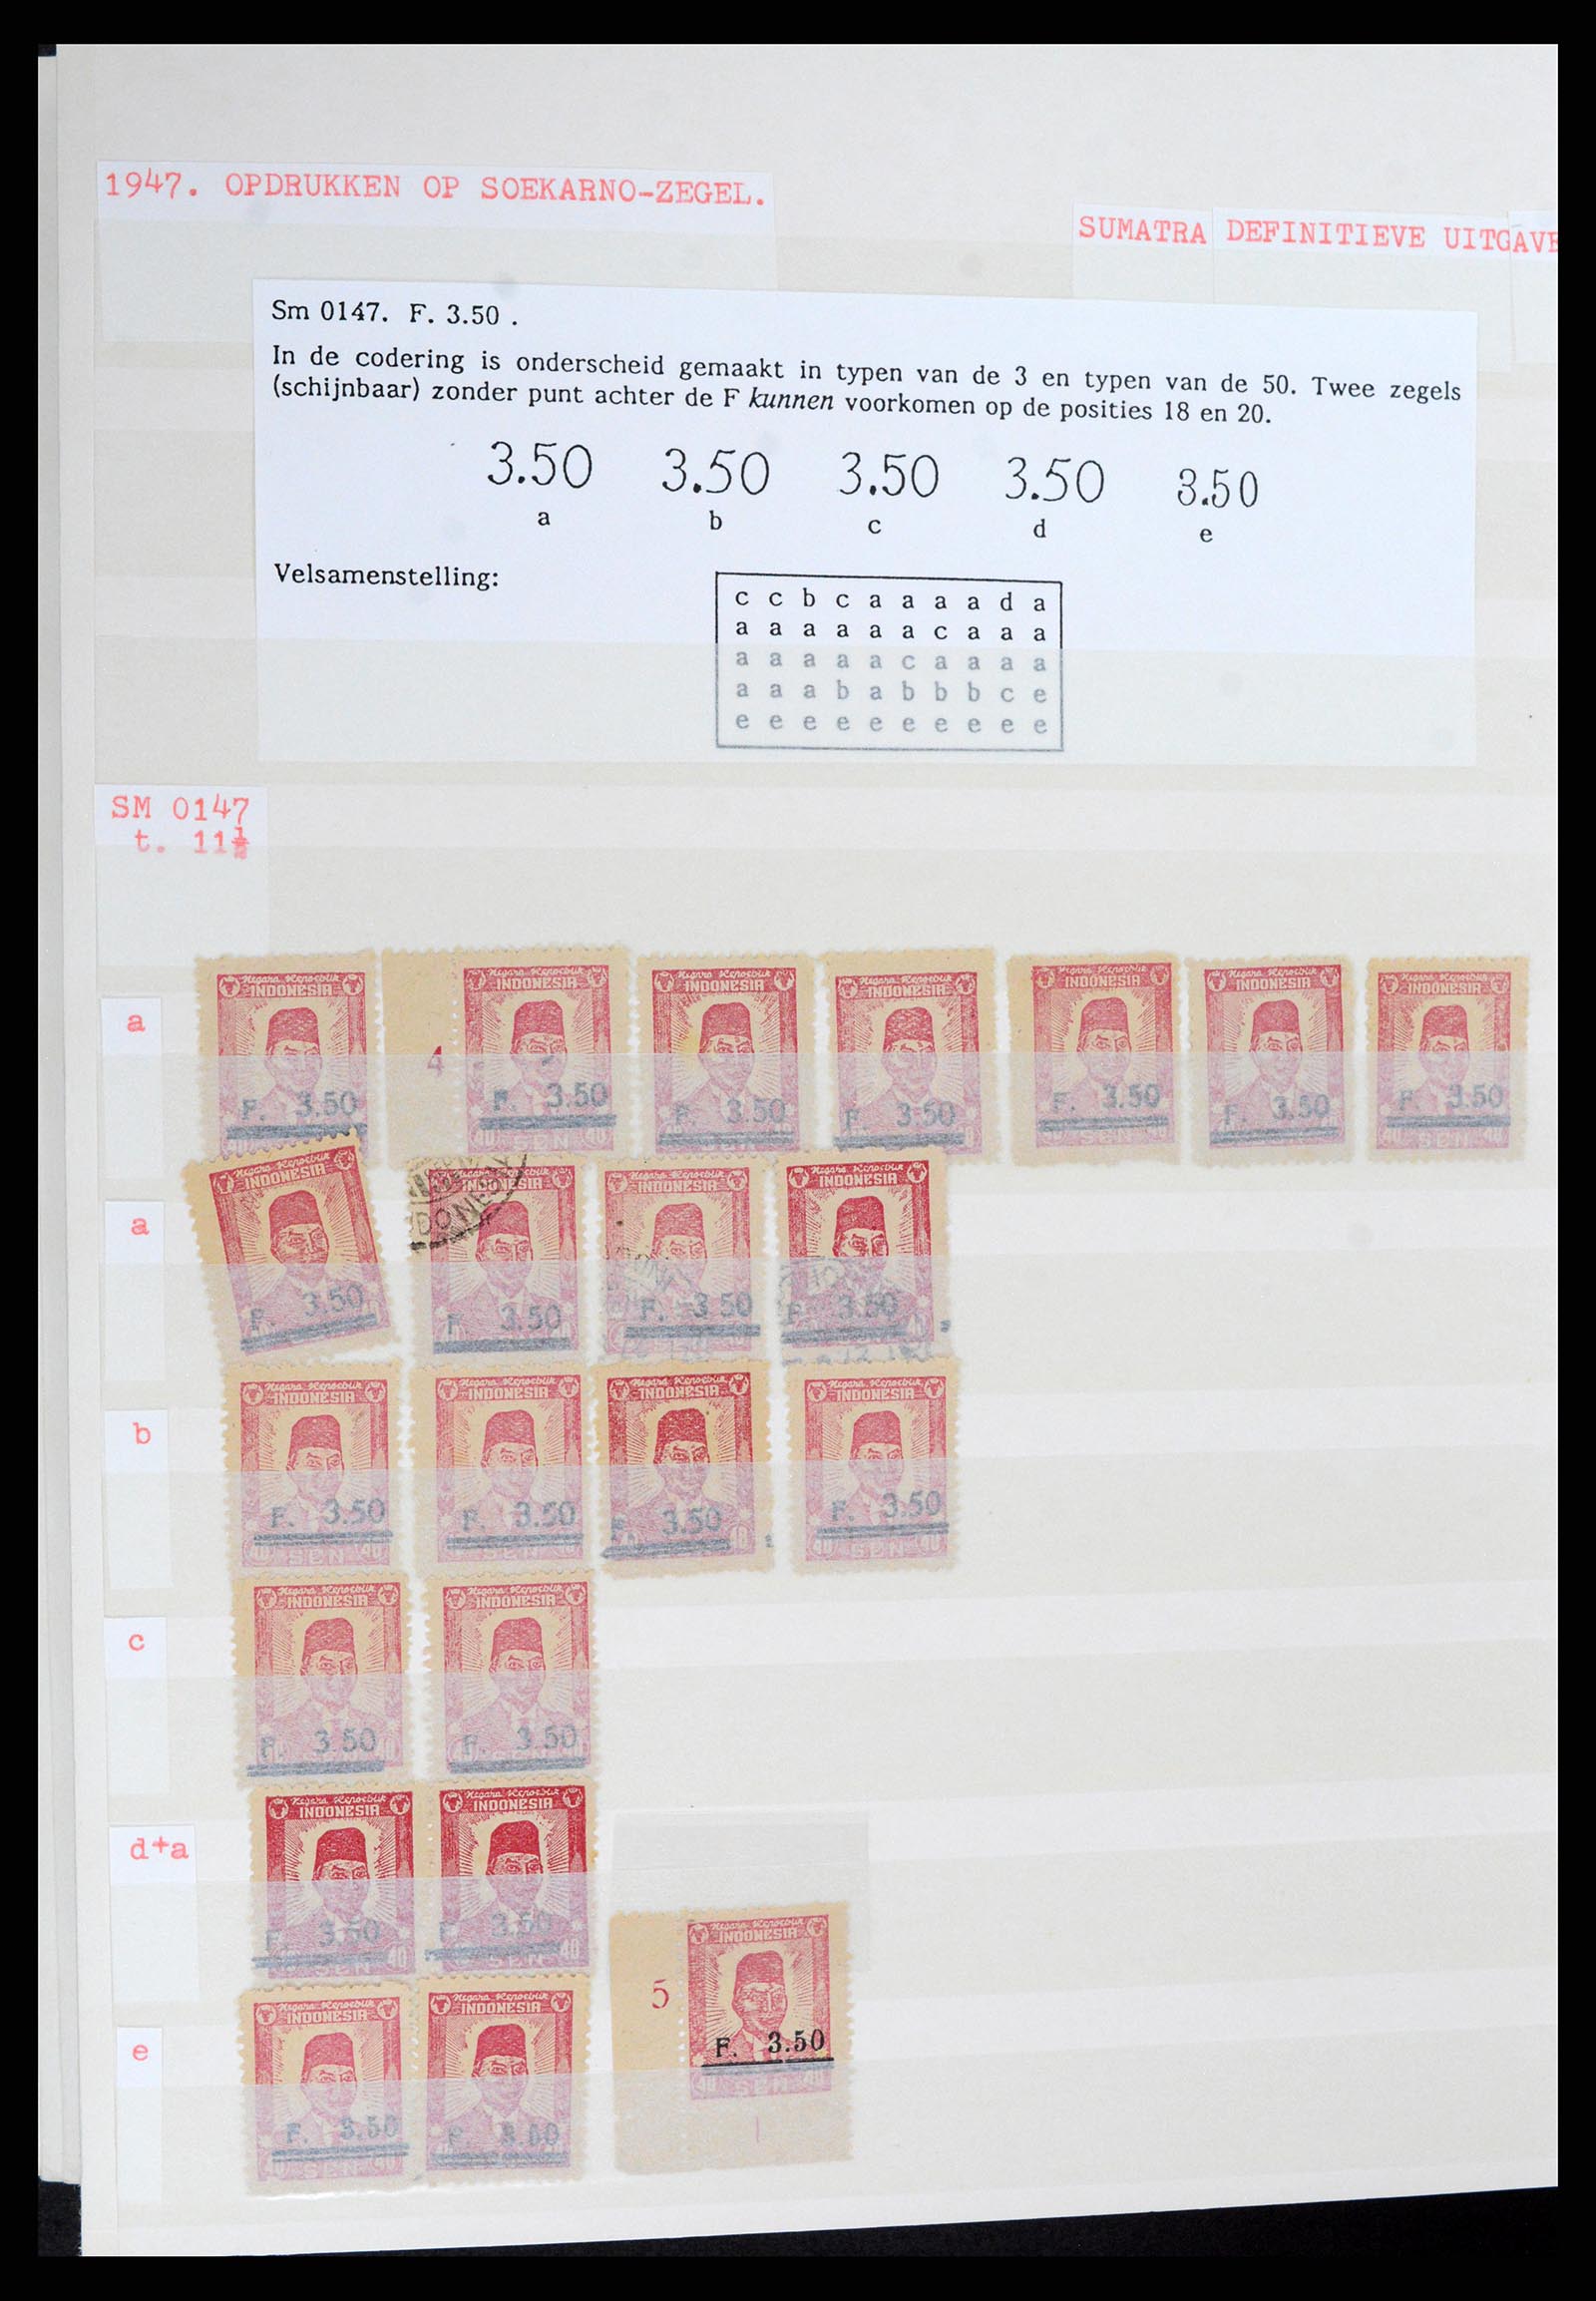 37692 130 - Stamp collection 37692 Indonesia interimperiod 1945-1499.